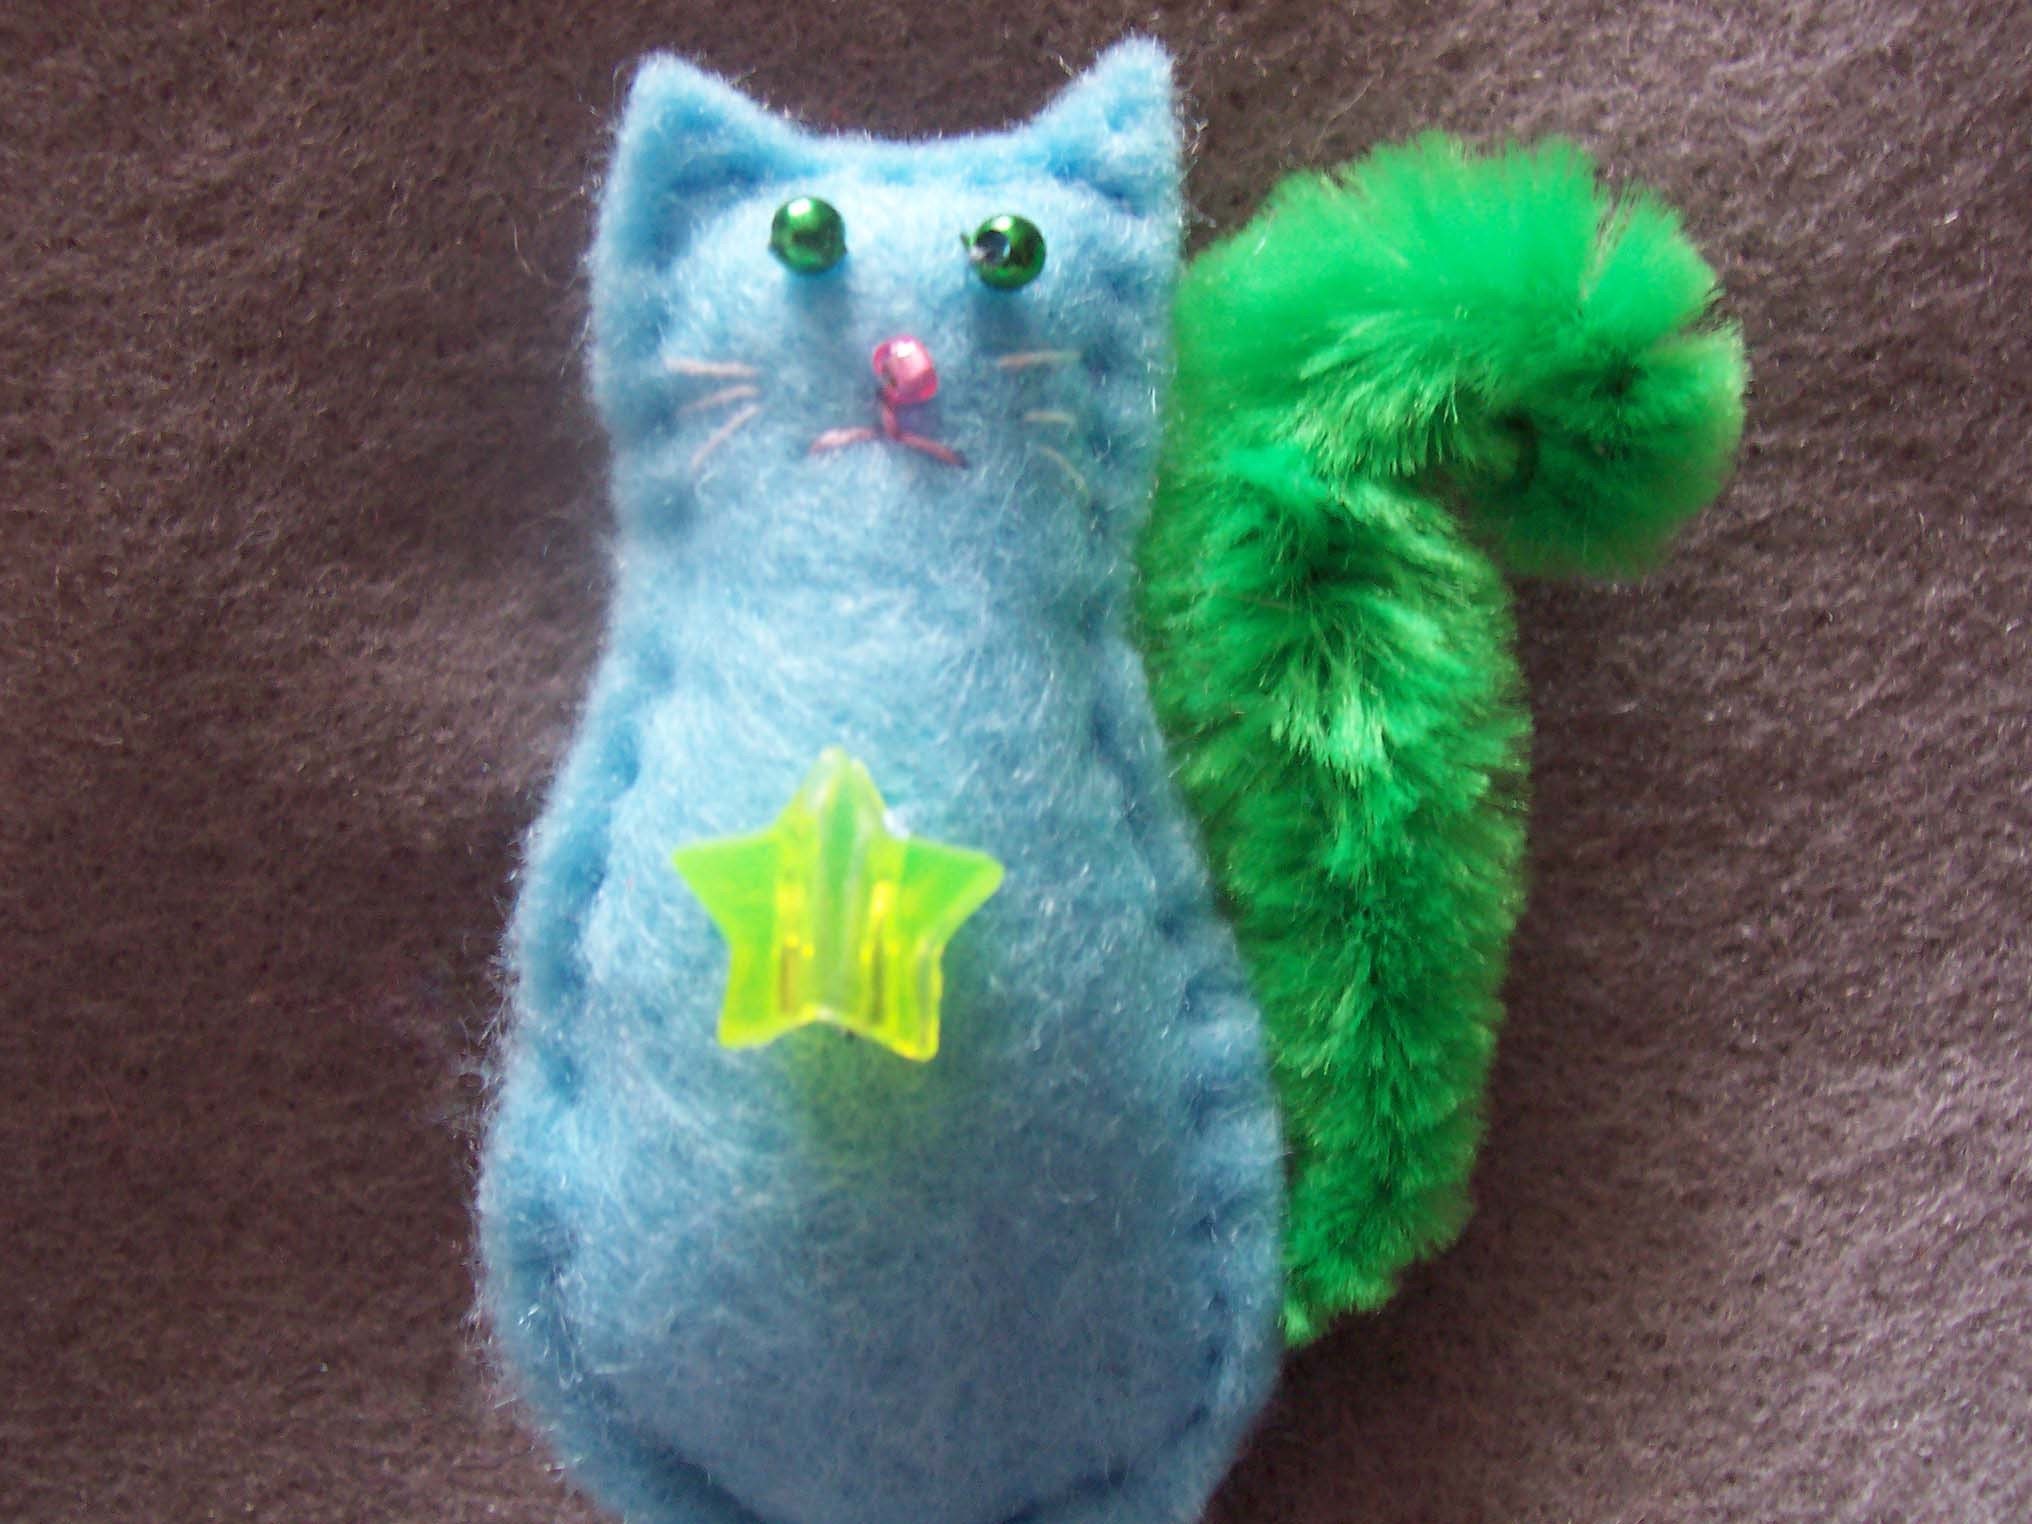 Adorable Baby Blue Felt Cat Crooch. With a Very Fluffy, Bright Green Tail and a Flourescent Green Star Bead.